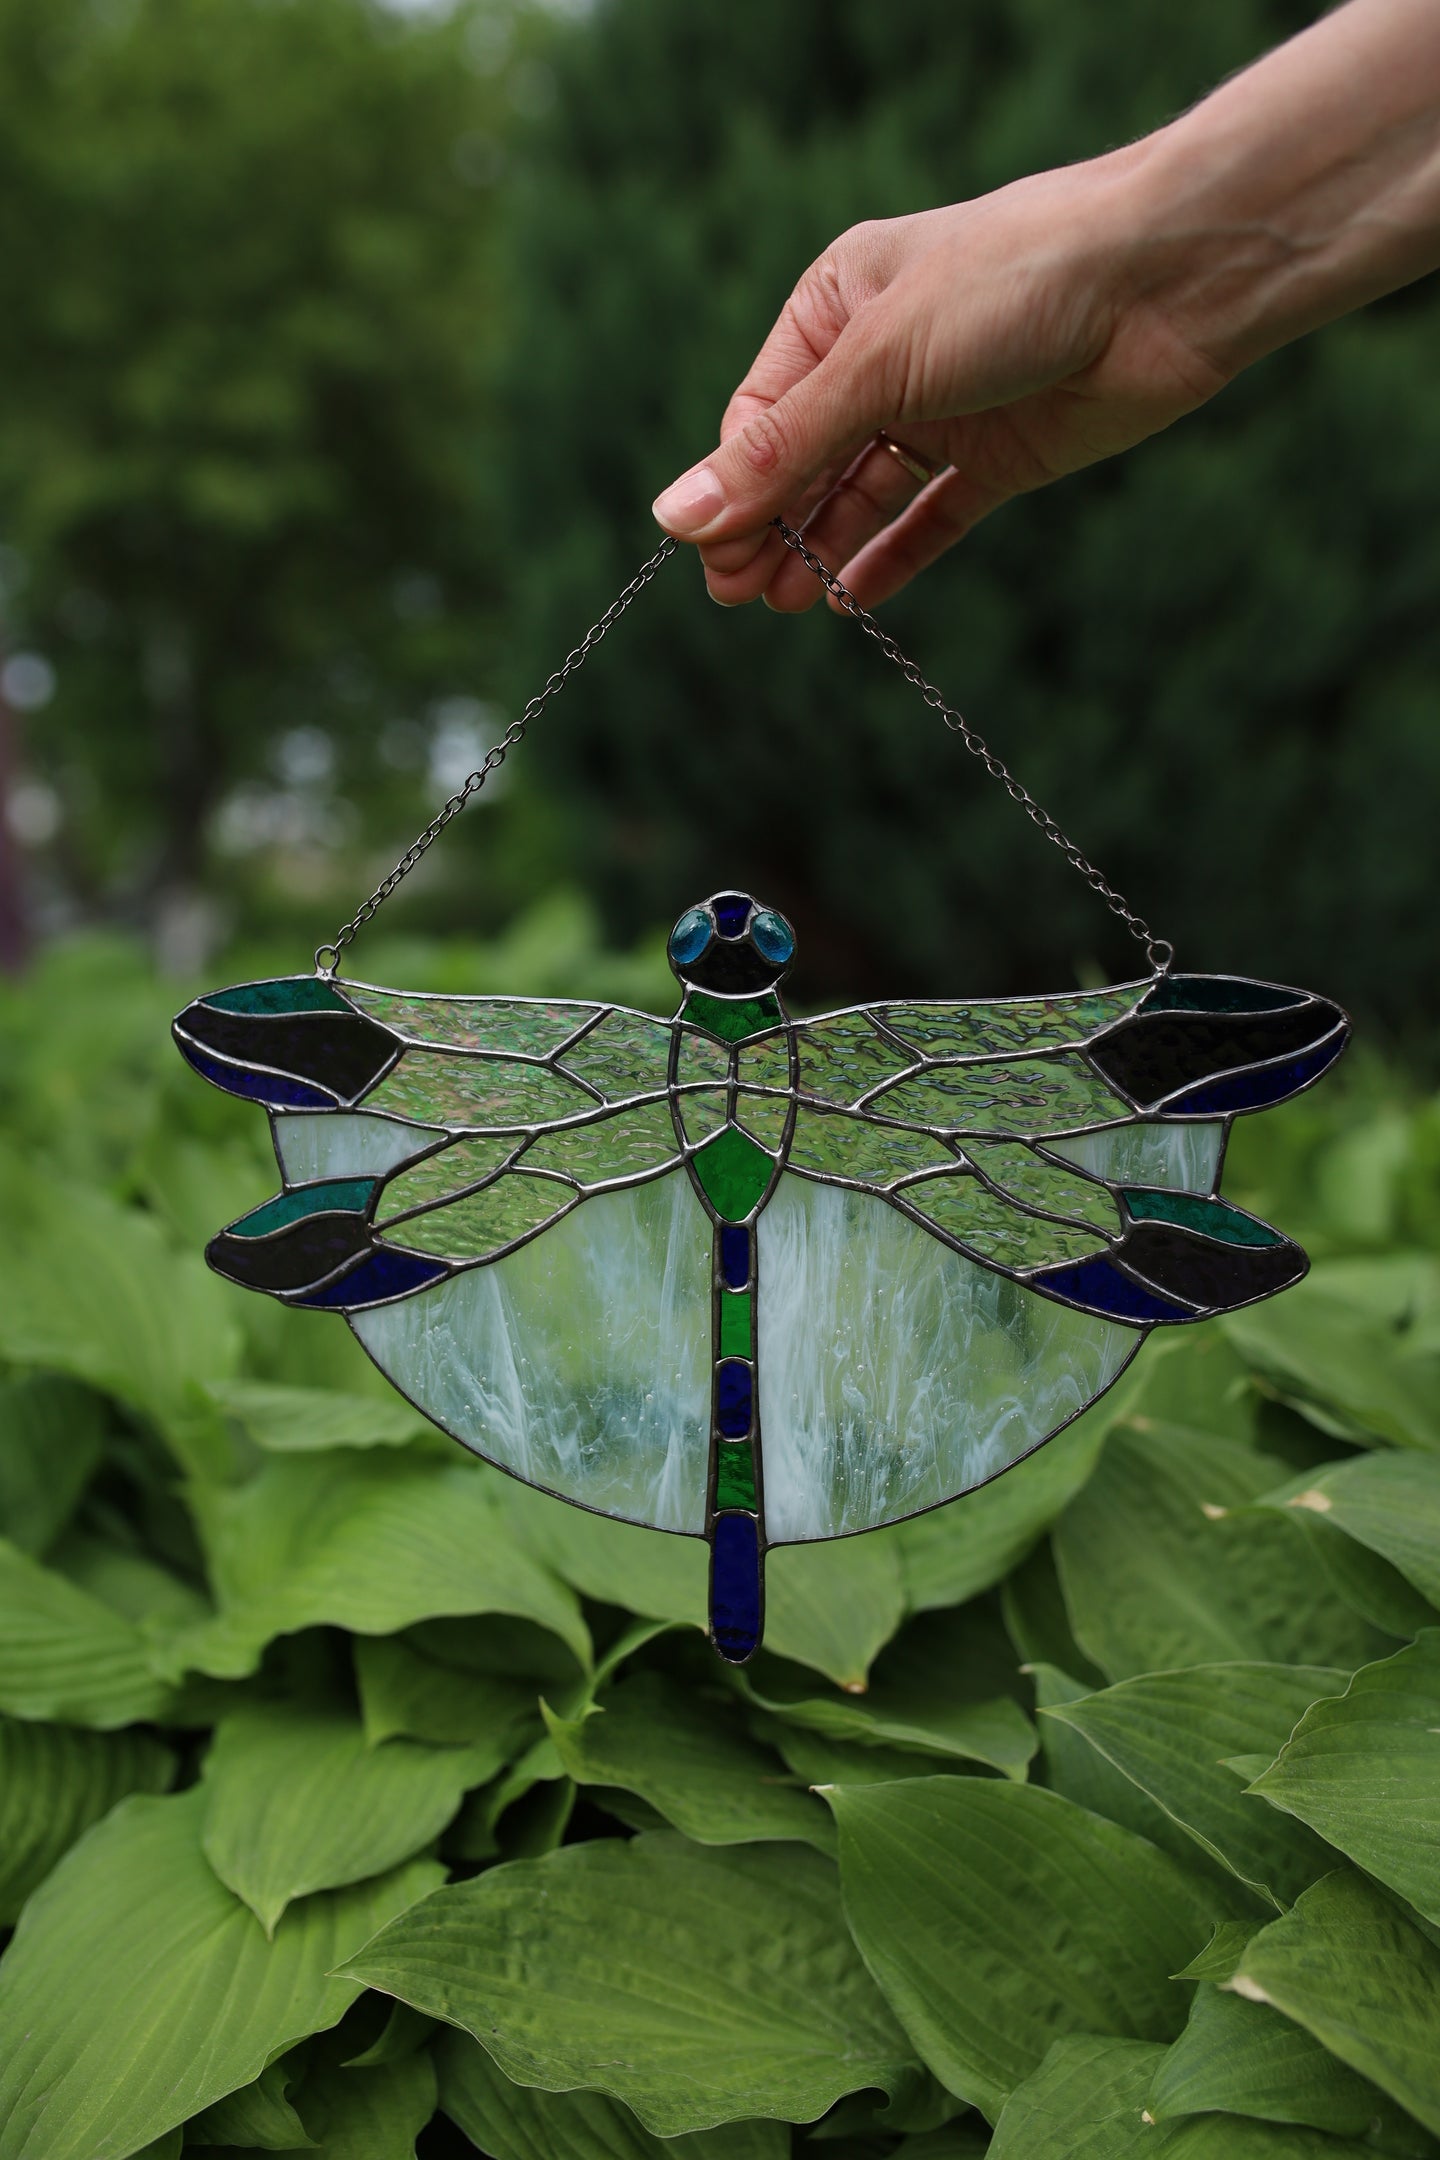 Stained glass suncatcher Dragonfly window hanging Stained-glass home Mother's day gift decor Glass window pendant